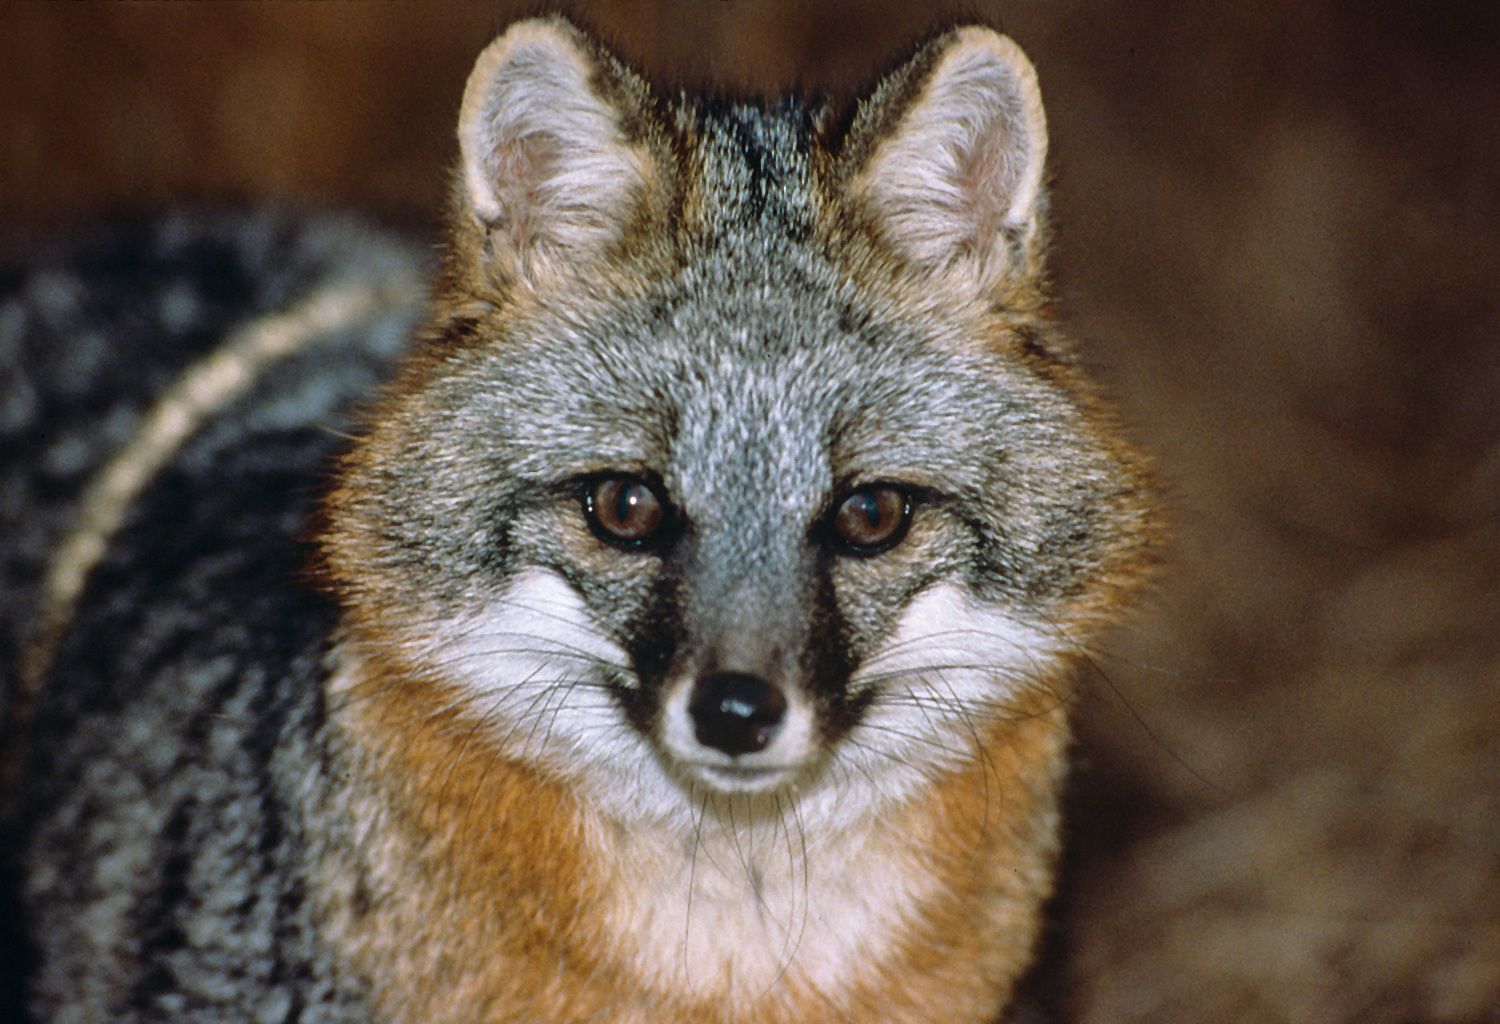 The gray fox is one of two fox species found in Ohio